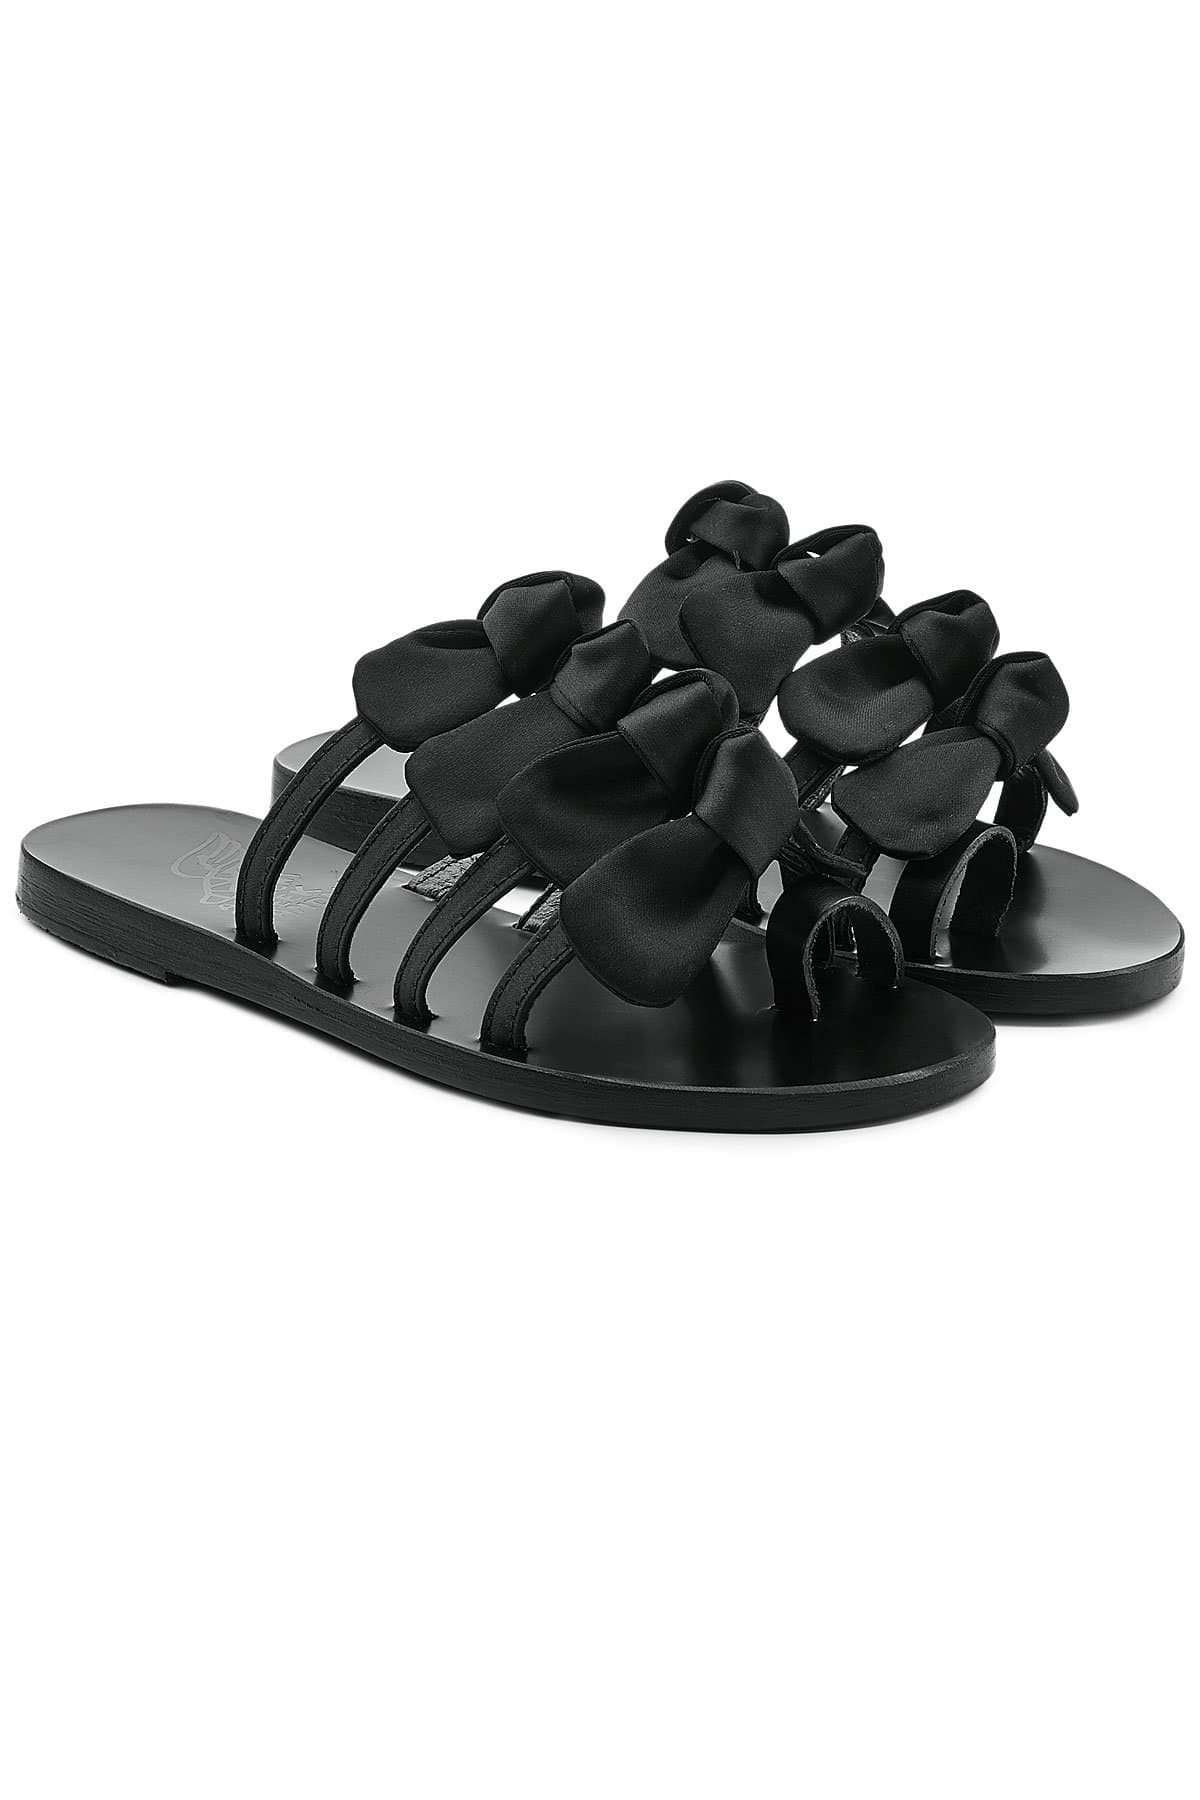 Ancient Greek Sandals - Hara Sandals with Satin Bows and Leather